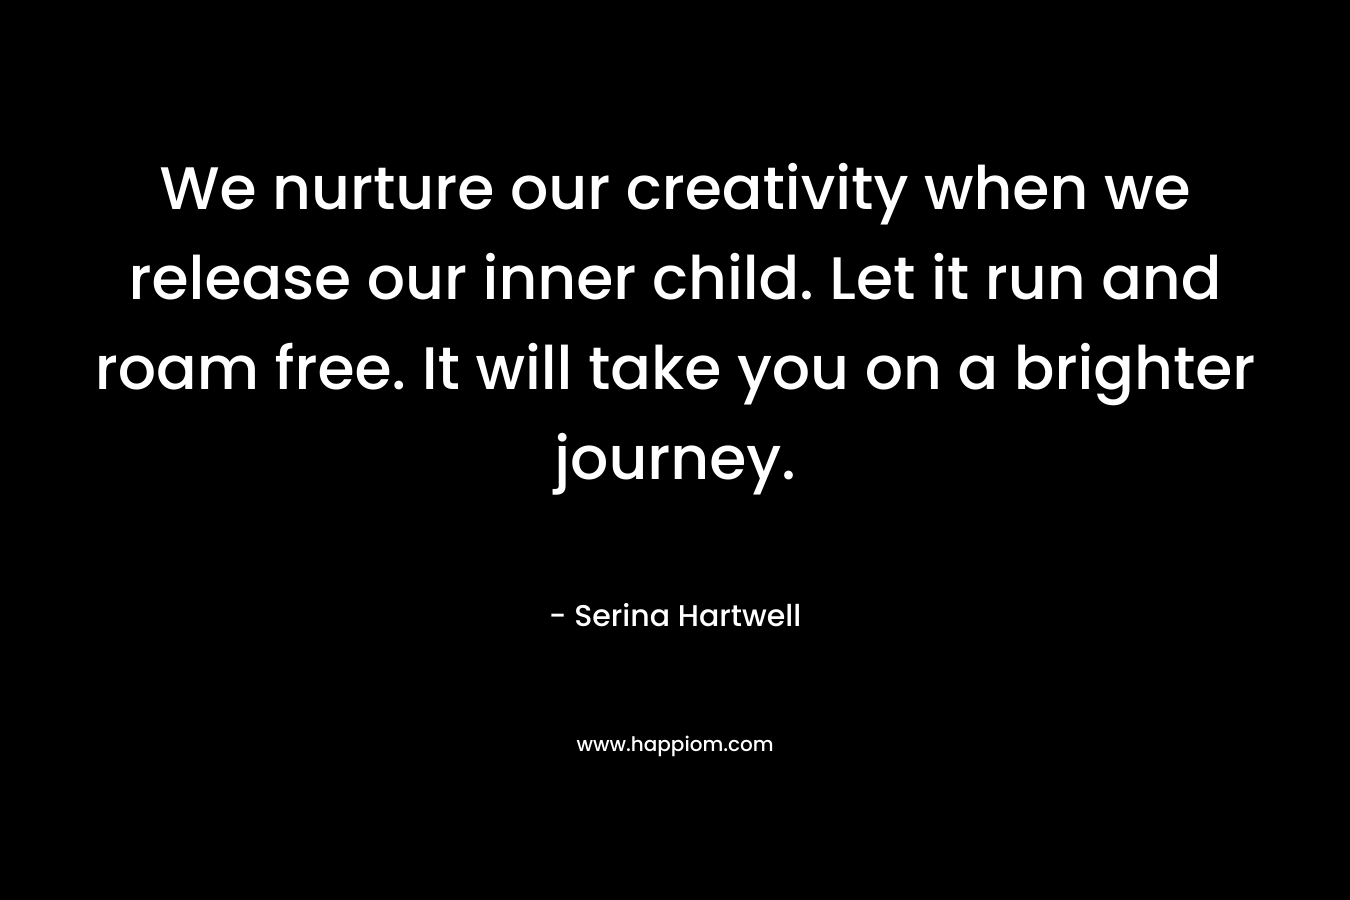 We nurture our creativity when we release our inner child. Let it run and roam free. It will take you on a brighter journey.